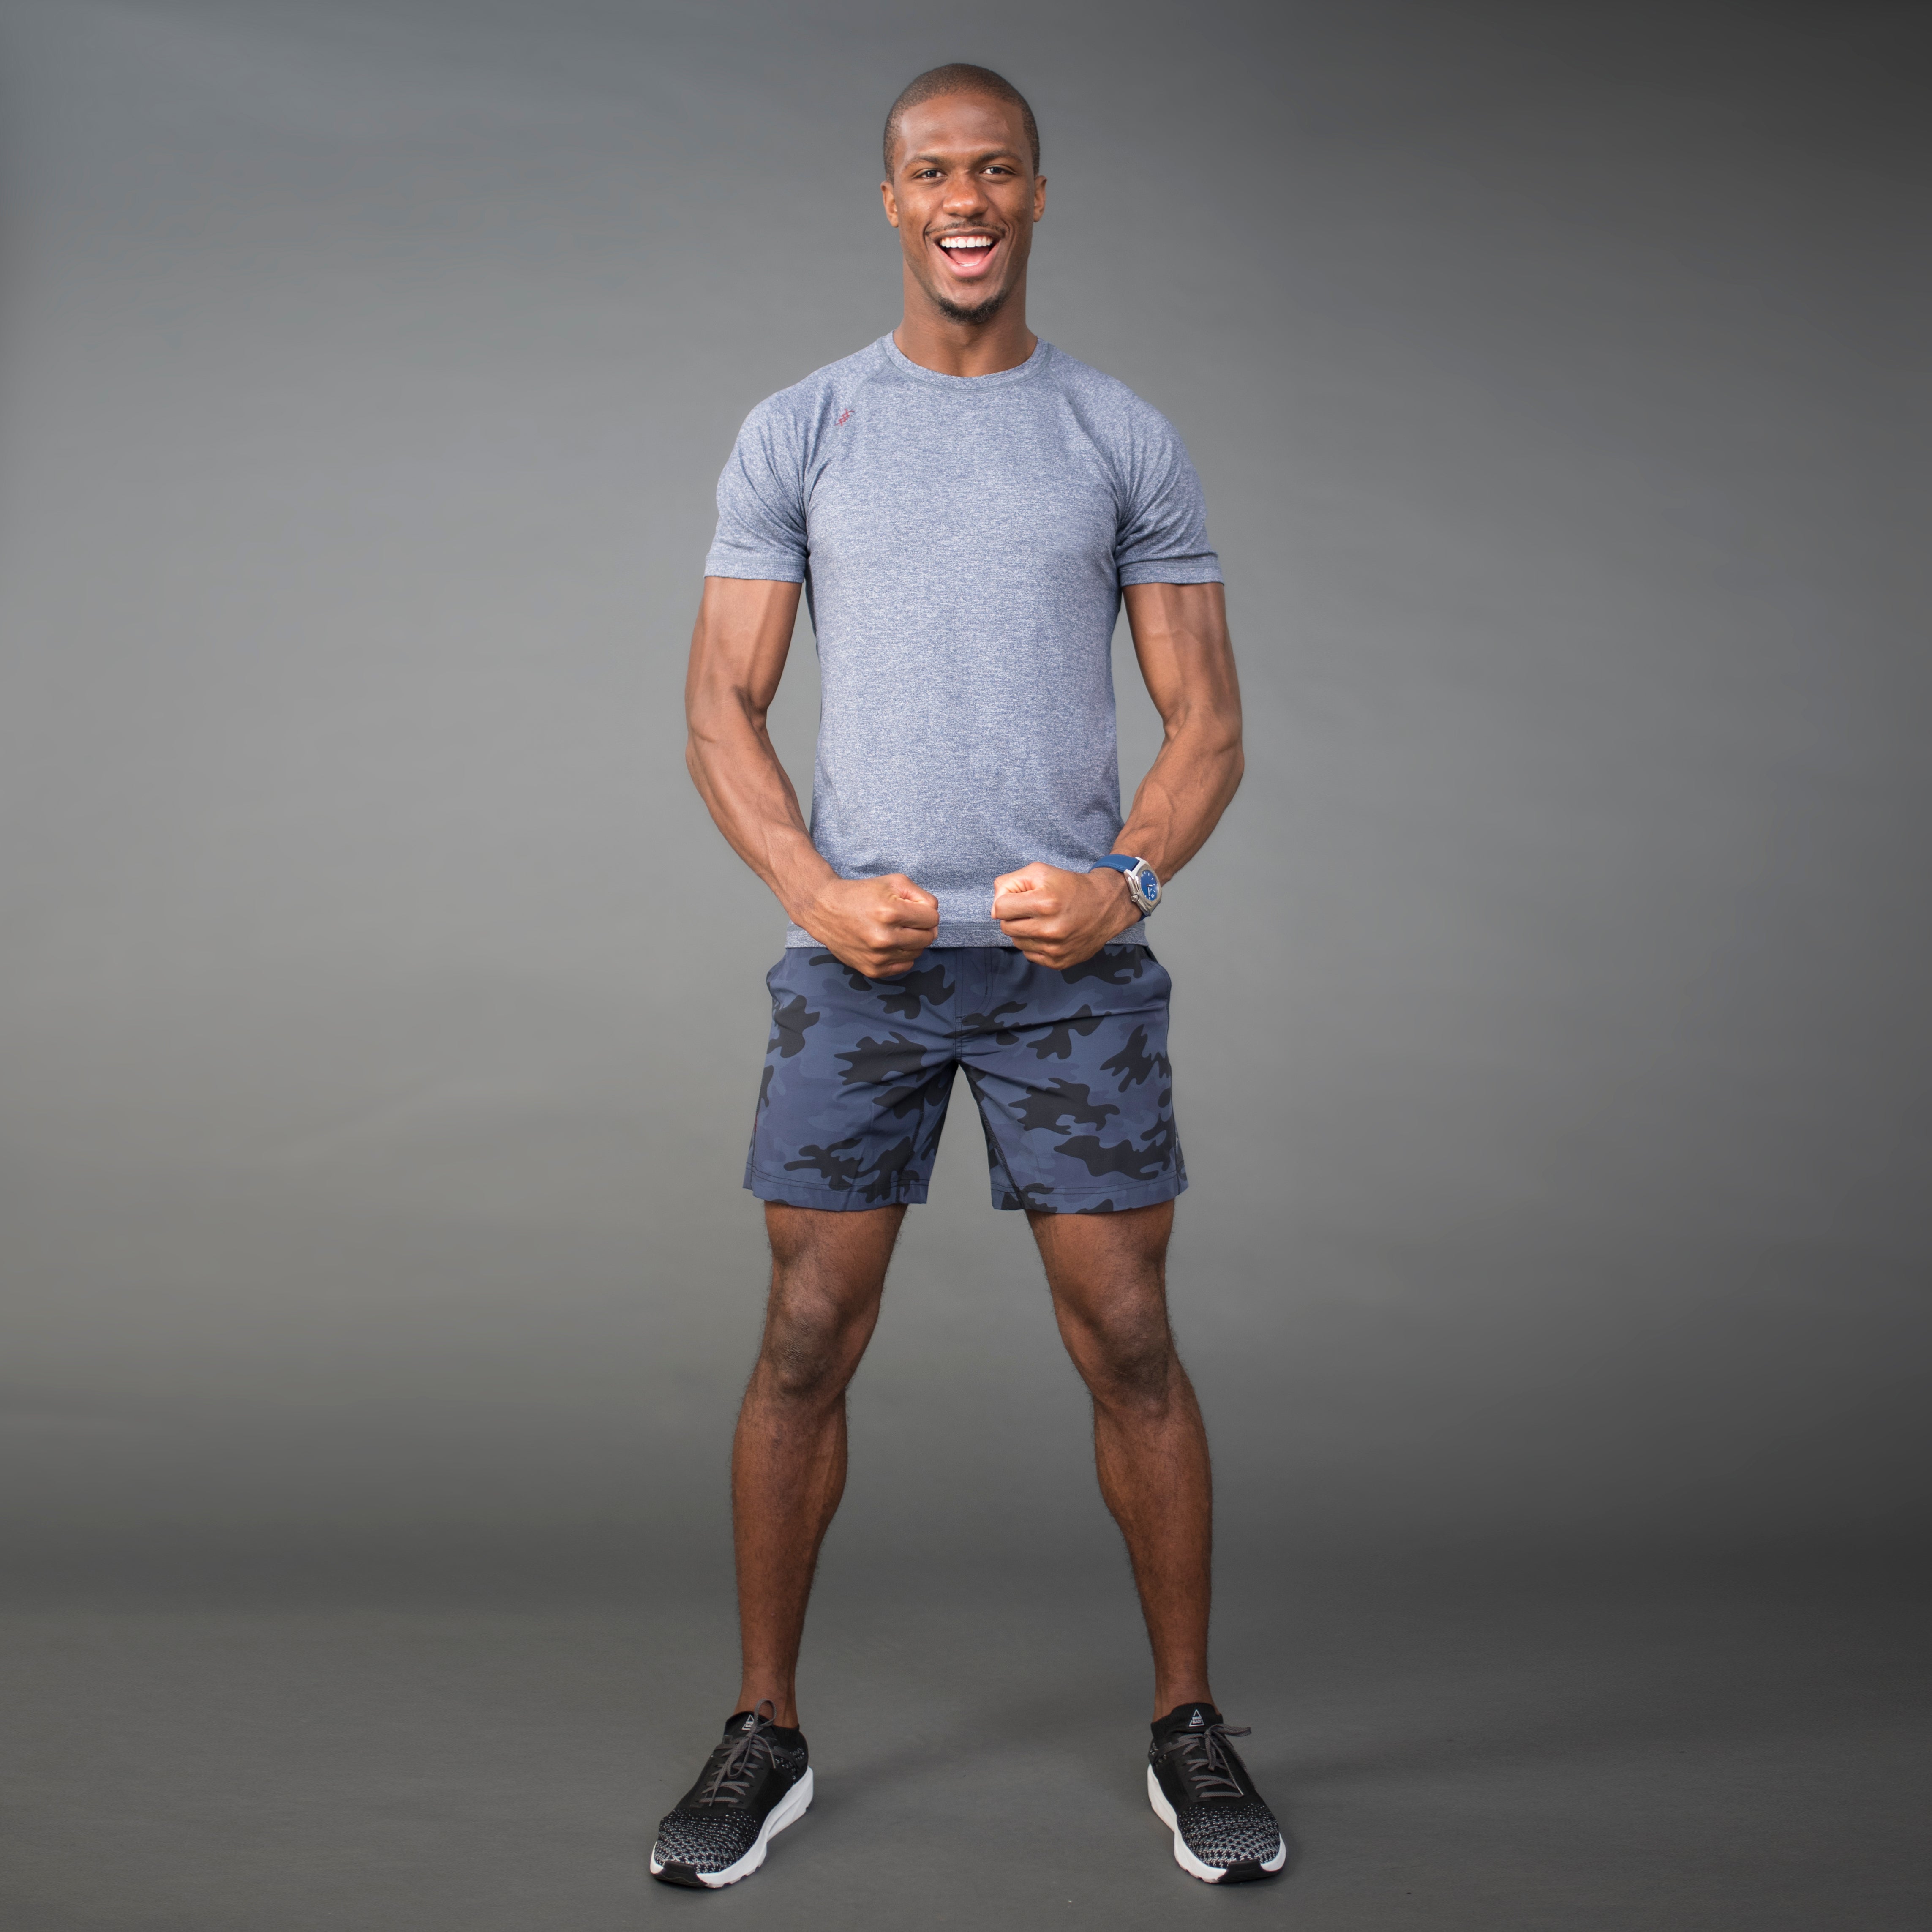 Our Mako Short by Rhone makes GQ's list of the top 6 workout shorts.